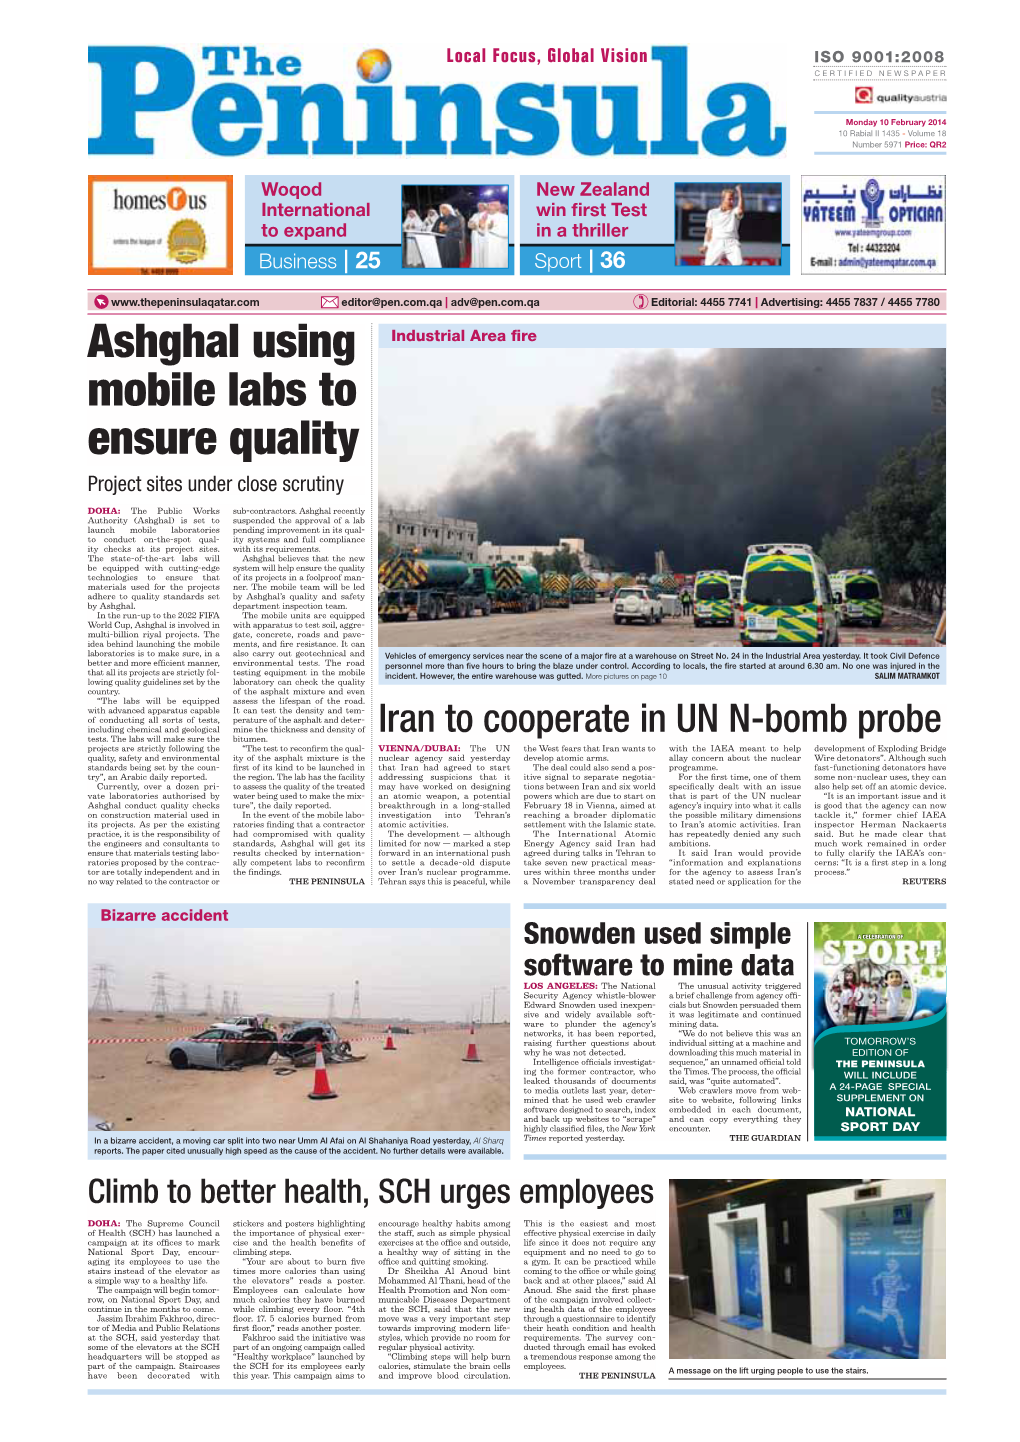 Ashghal Using Mobile Labs to Ensure Quality